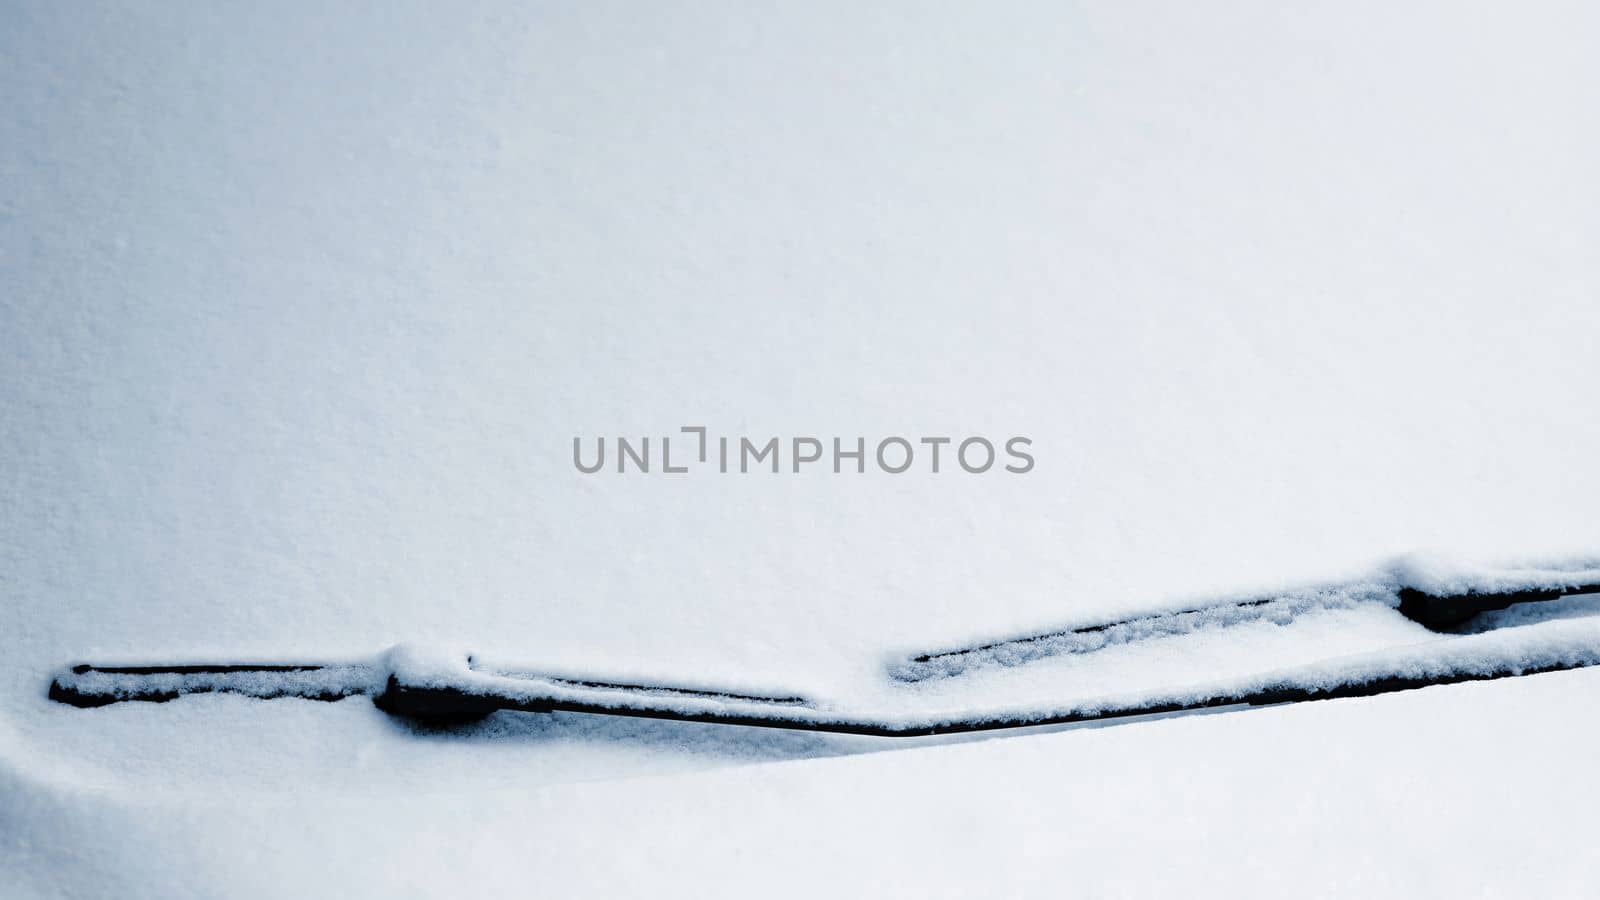 Snowy windshield on a car with wipers. Winter concept for traffic and road safety. by Montypeter